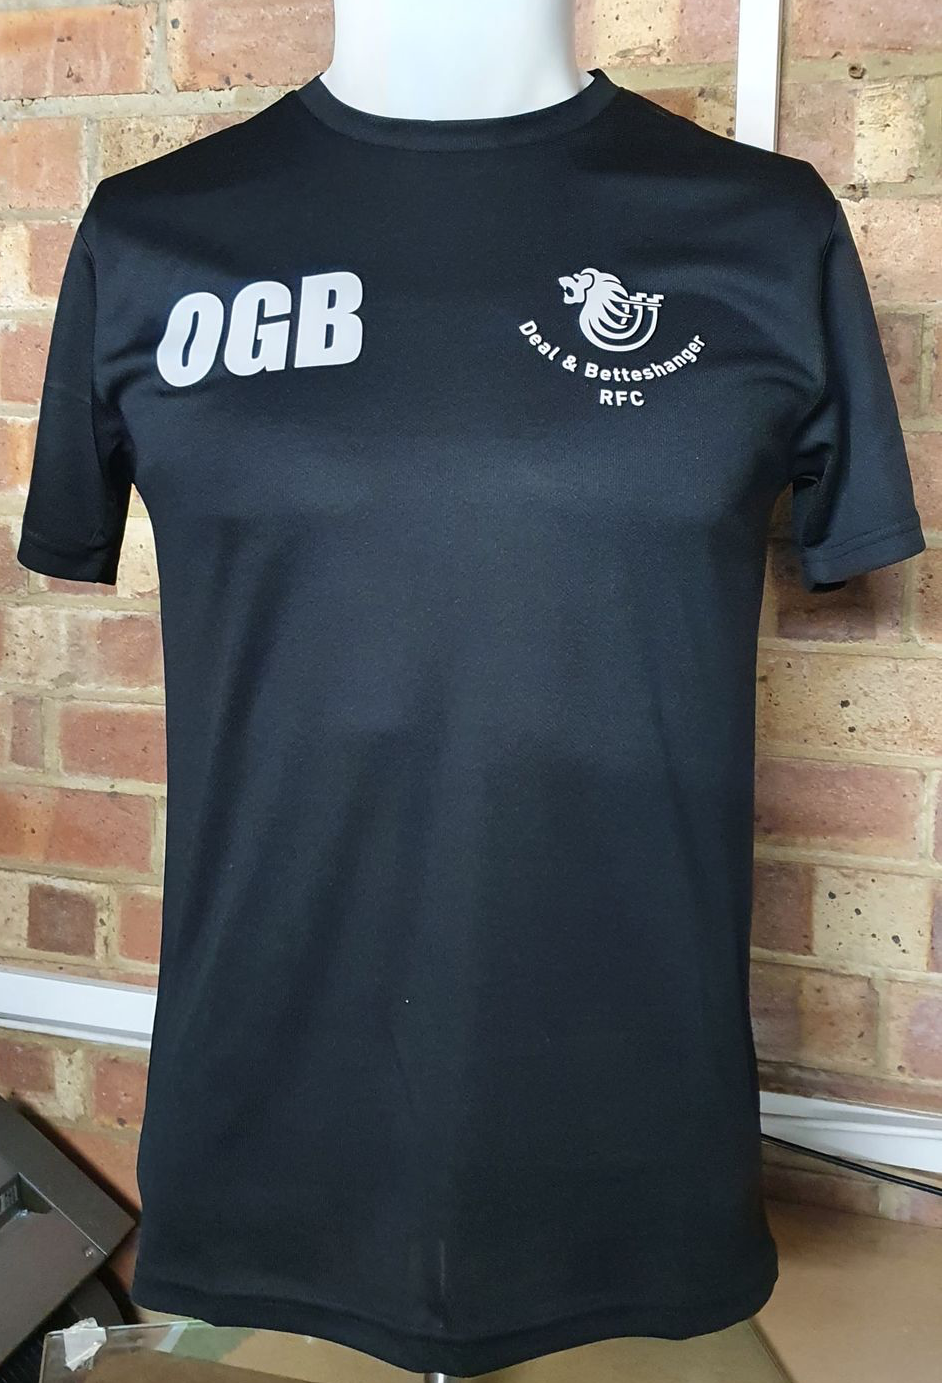 Adult Training top with D&B badge